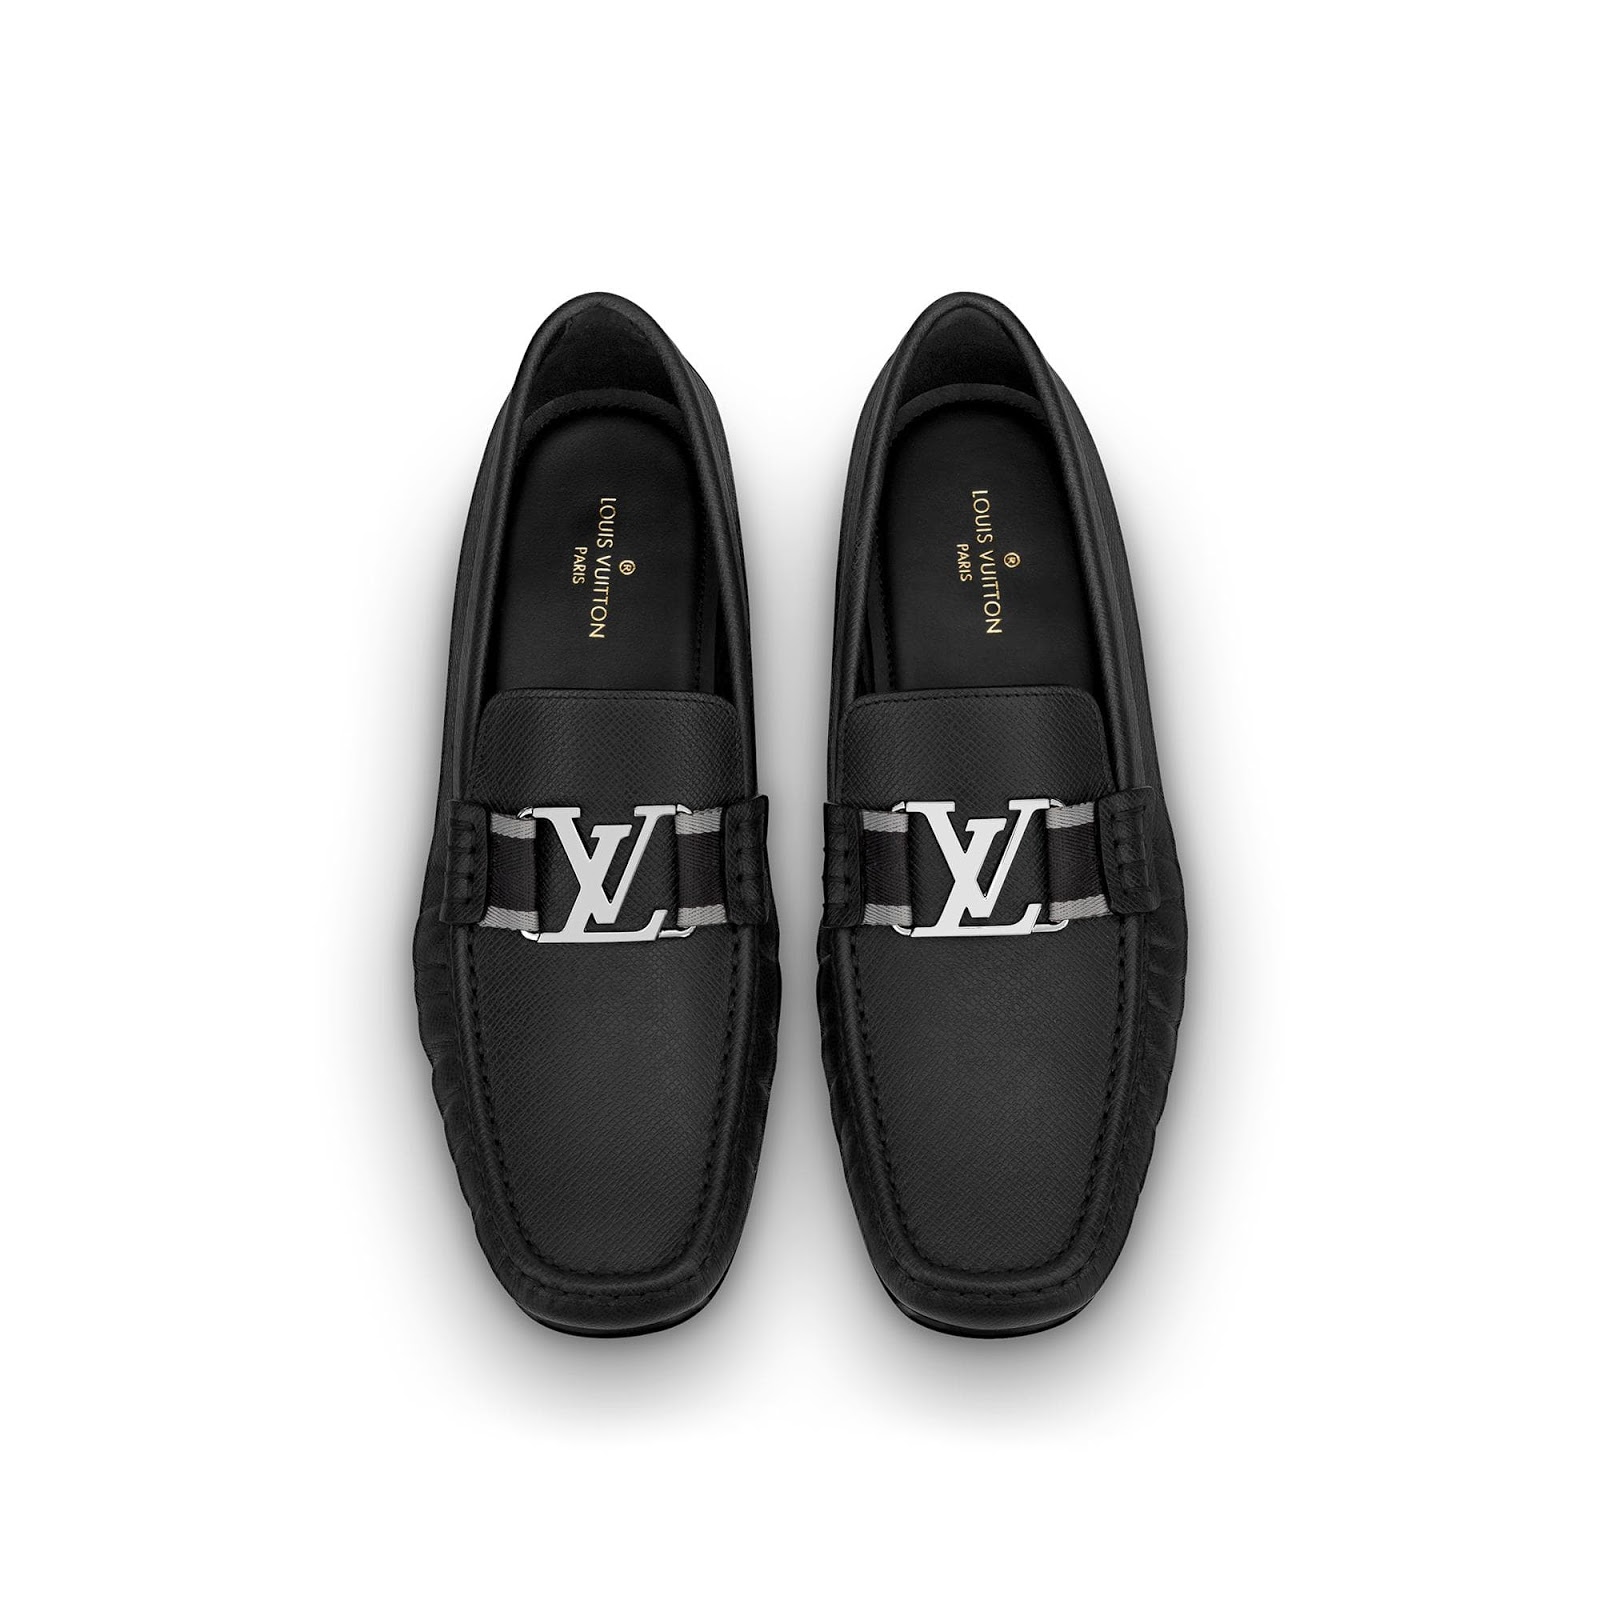 Details with more than 71 about the best genuine louis vutton men's ...